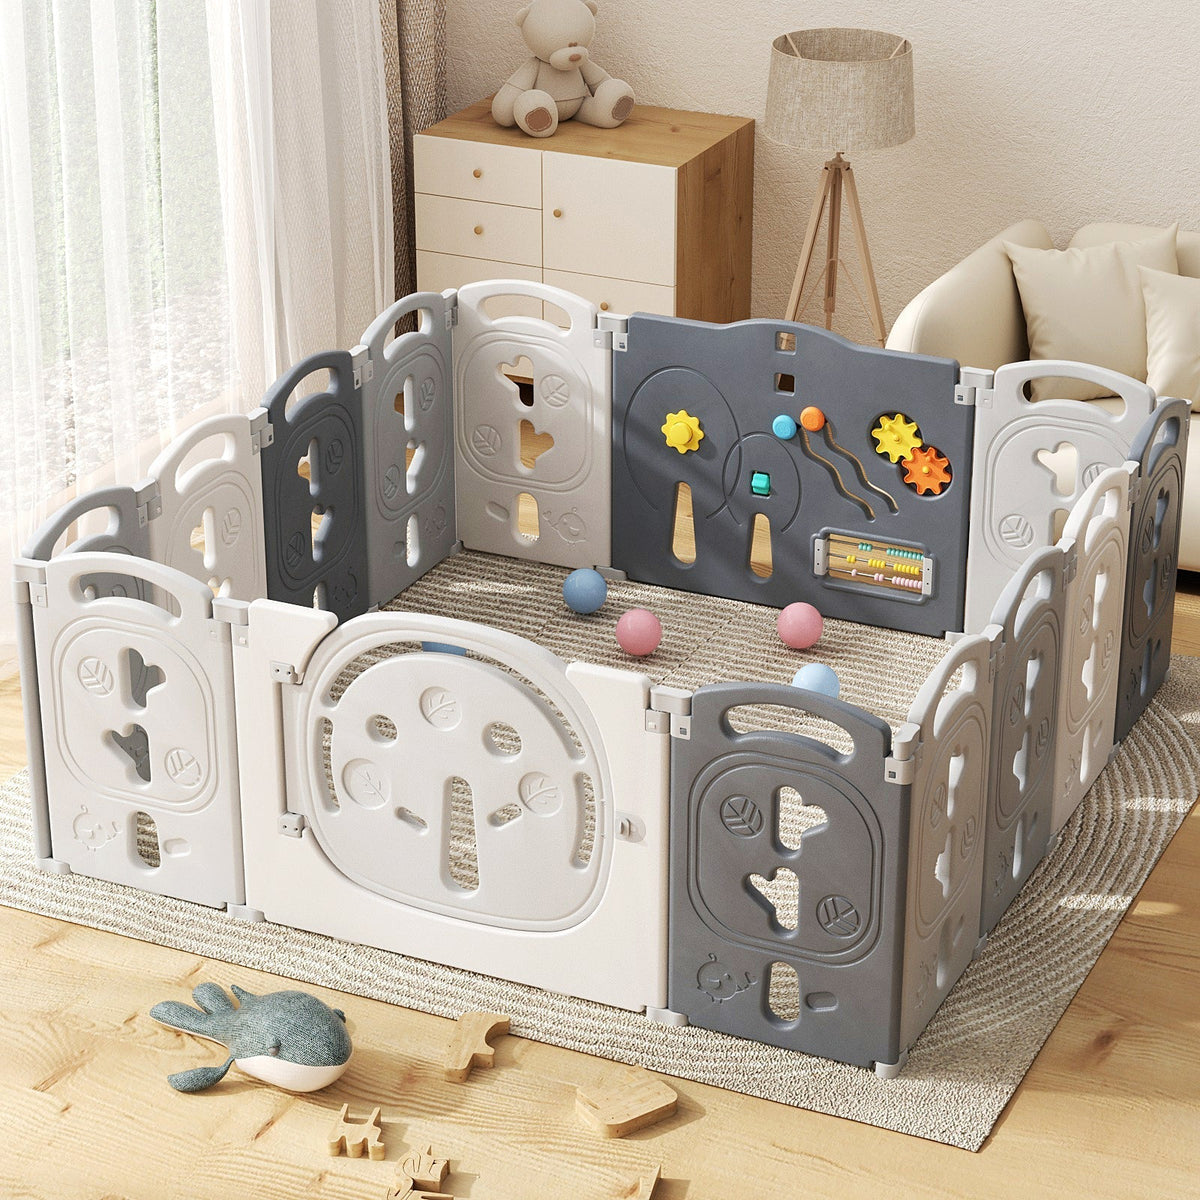 XJD Foldable Playpen for Babies, Grey Baby Safety Play Yard with Gaming Wall and Non-Slip Suction Cup